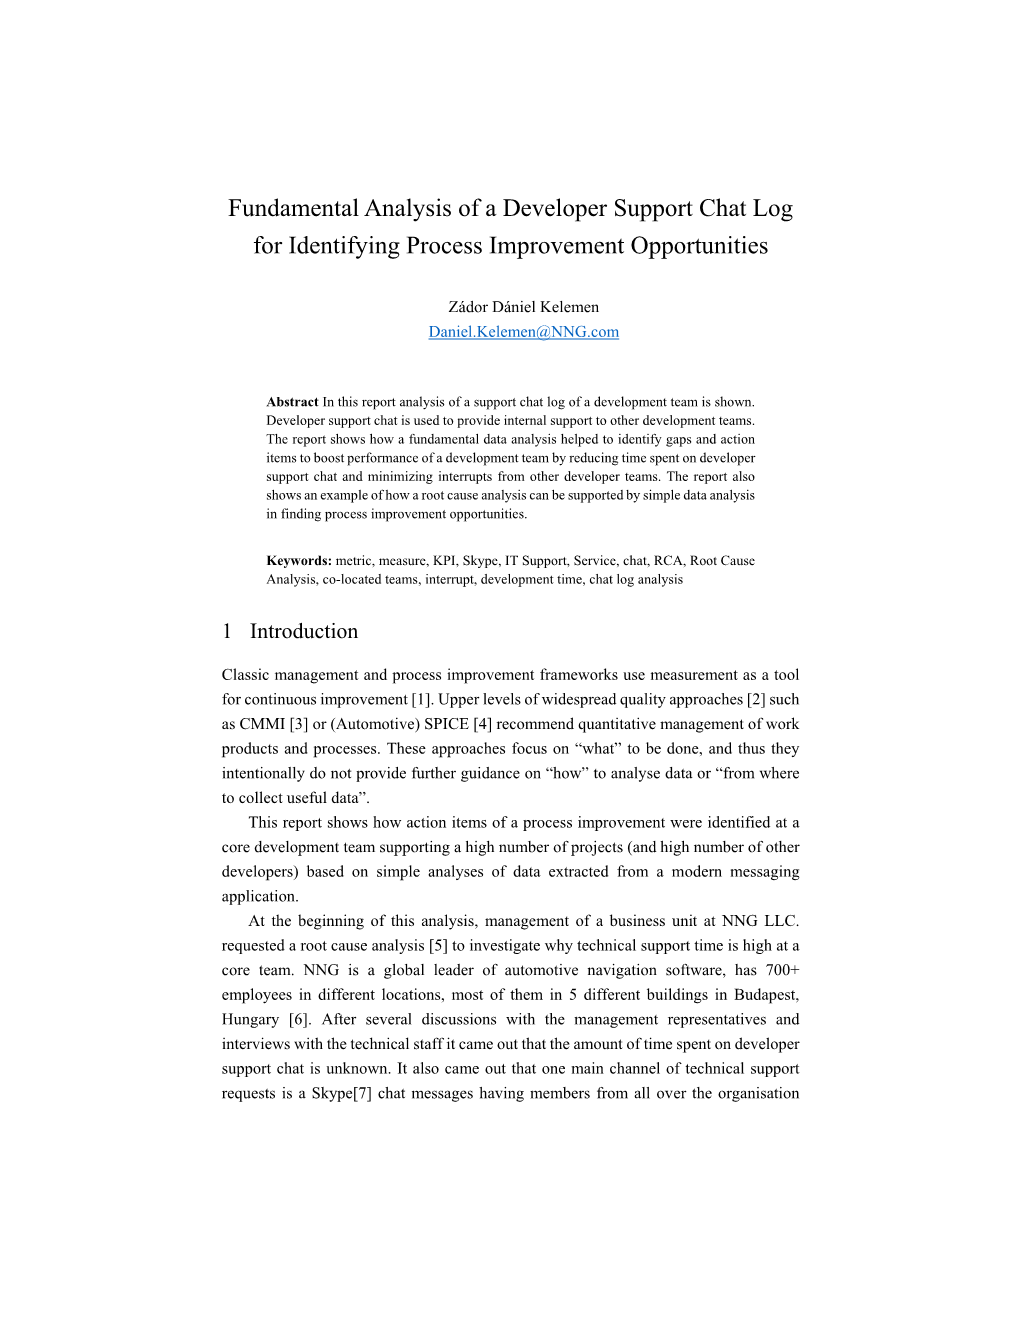 Fundamental Analysis of a Developer Support Chat Log for Identifying Process Improvement Opportunities